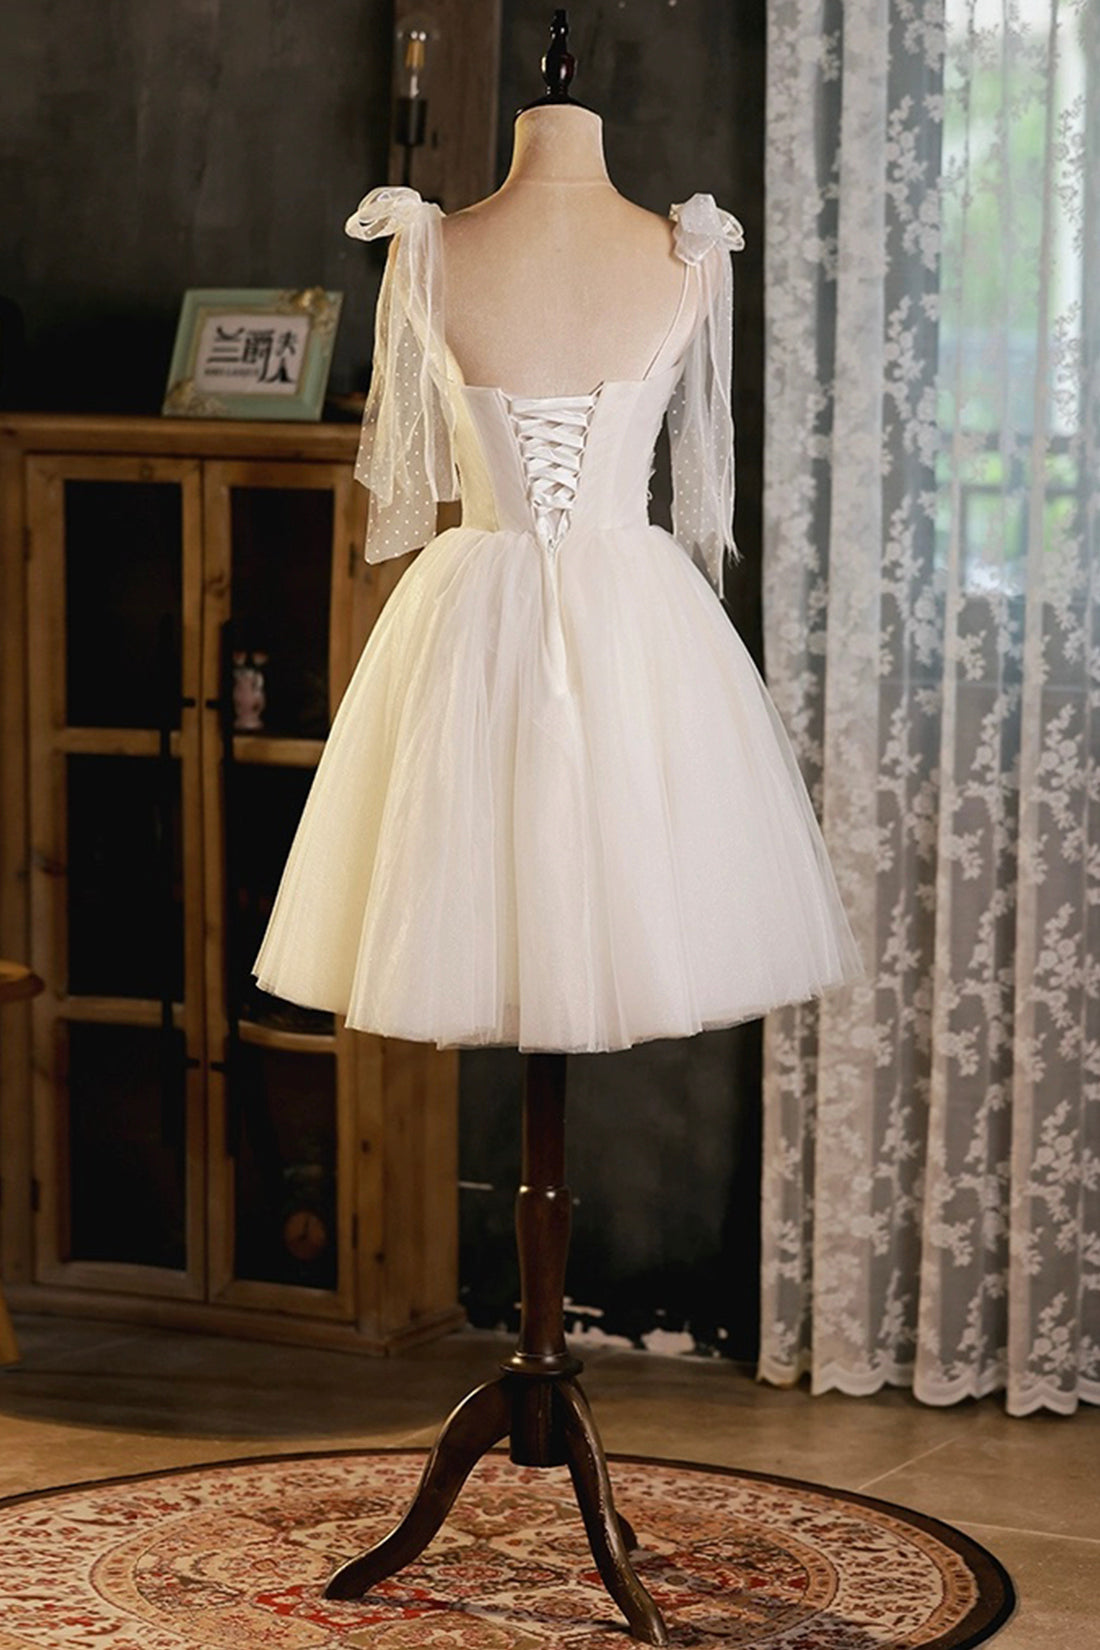 Light Champagne Spaghetti Strap Short Prom Dress, Cute A-Line Tulle Evening Party Dress